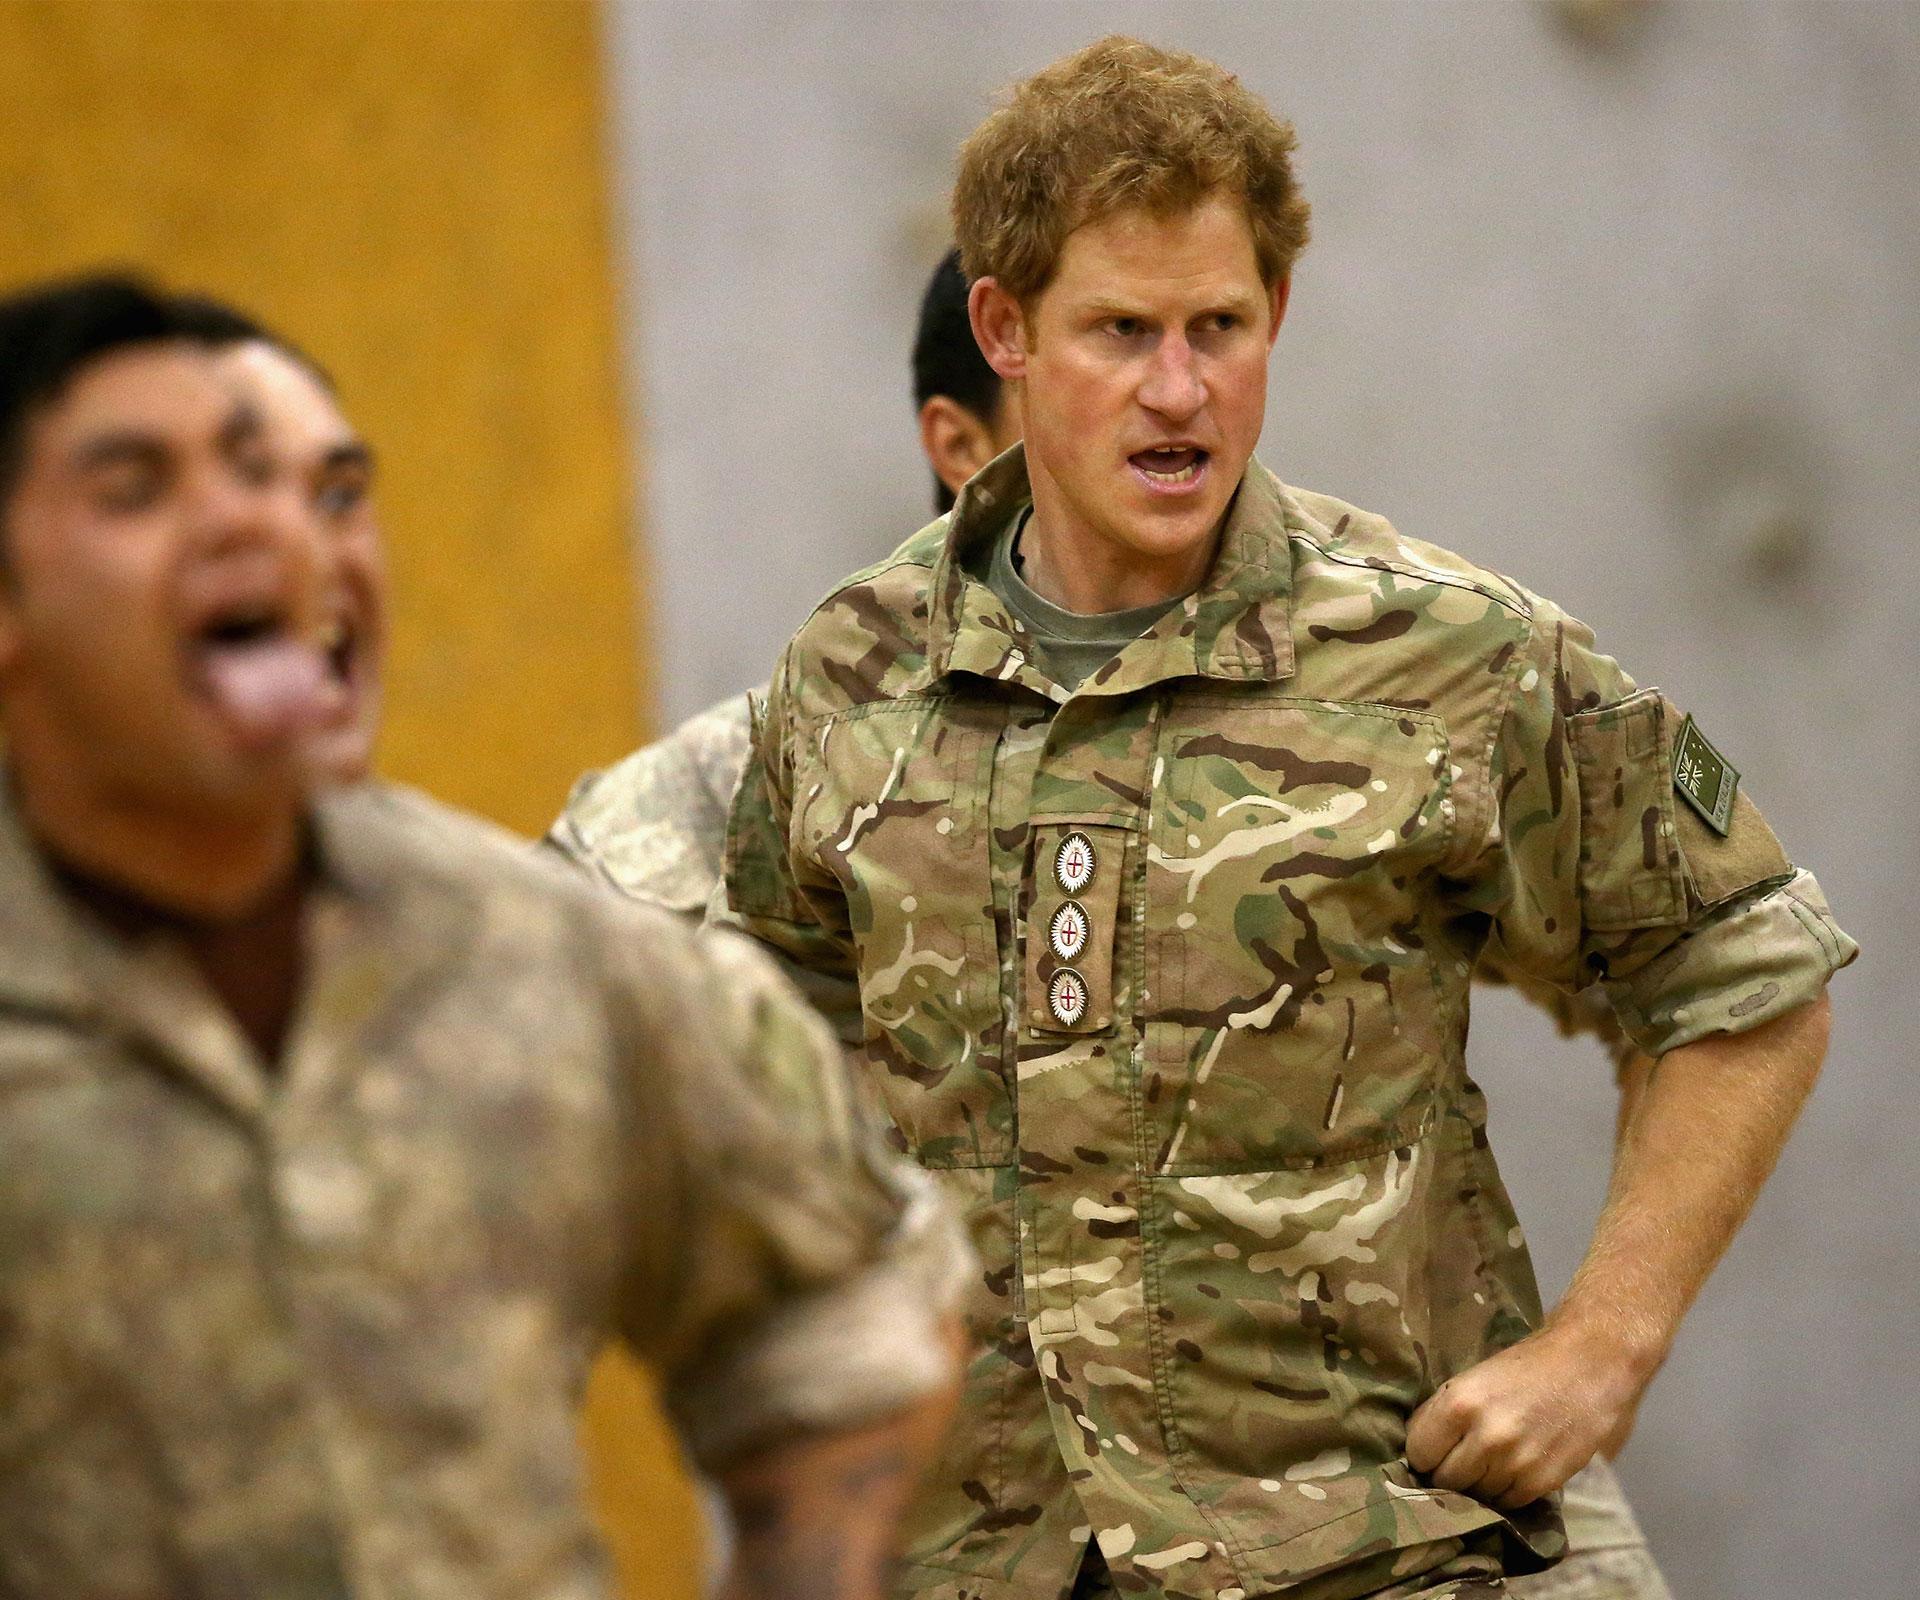 Prince Harry officially retires from the British Army